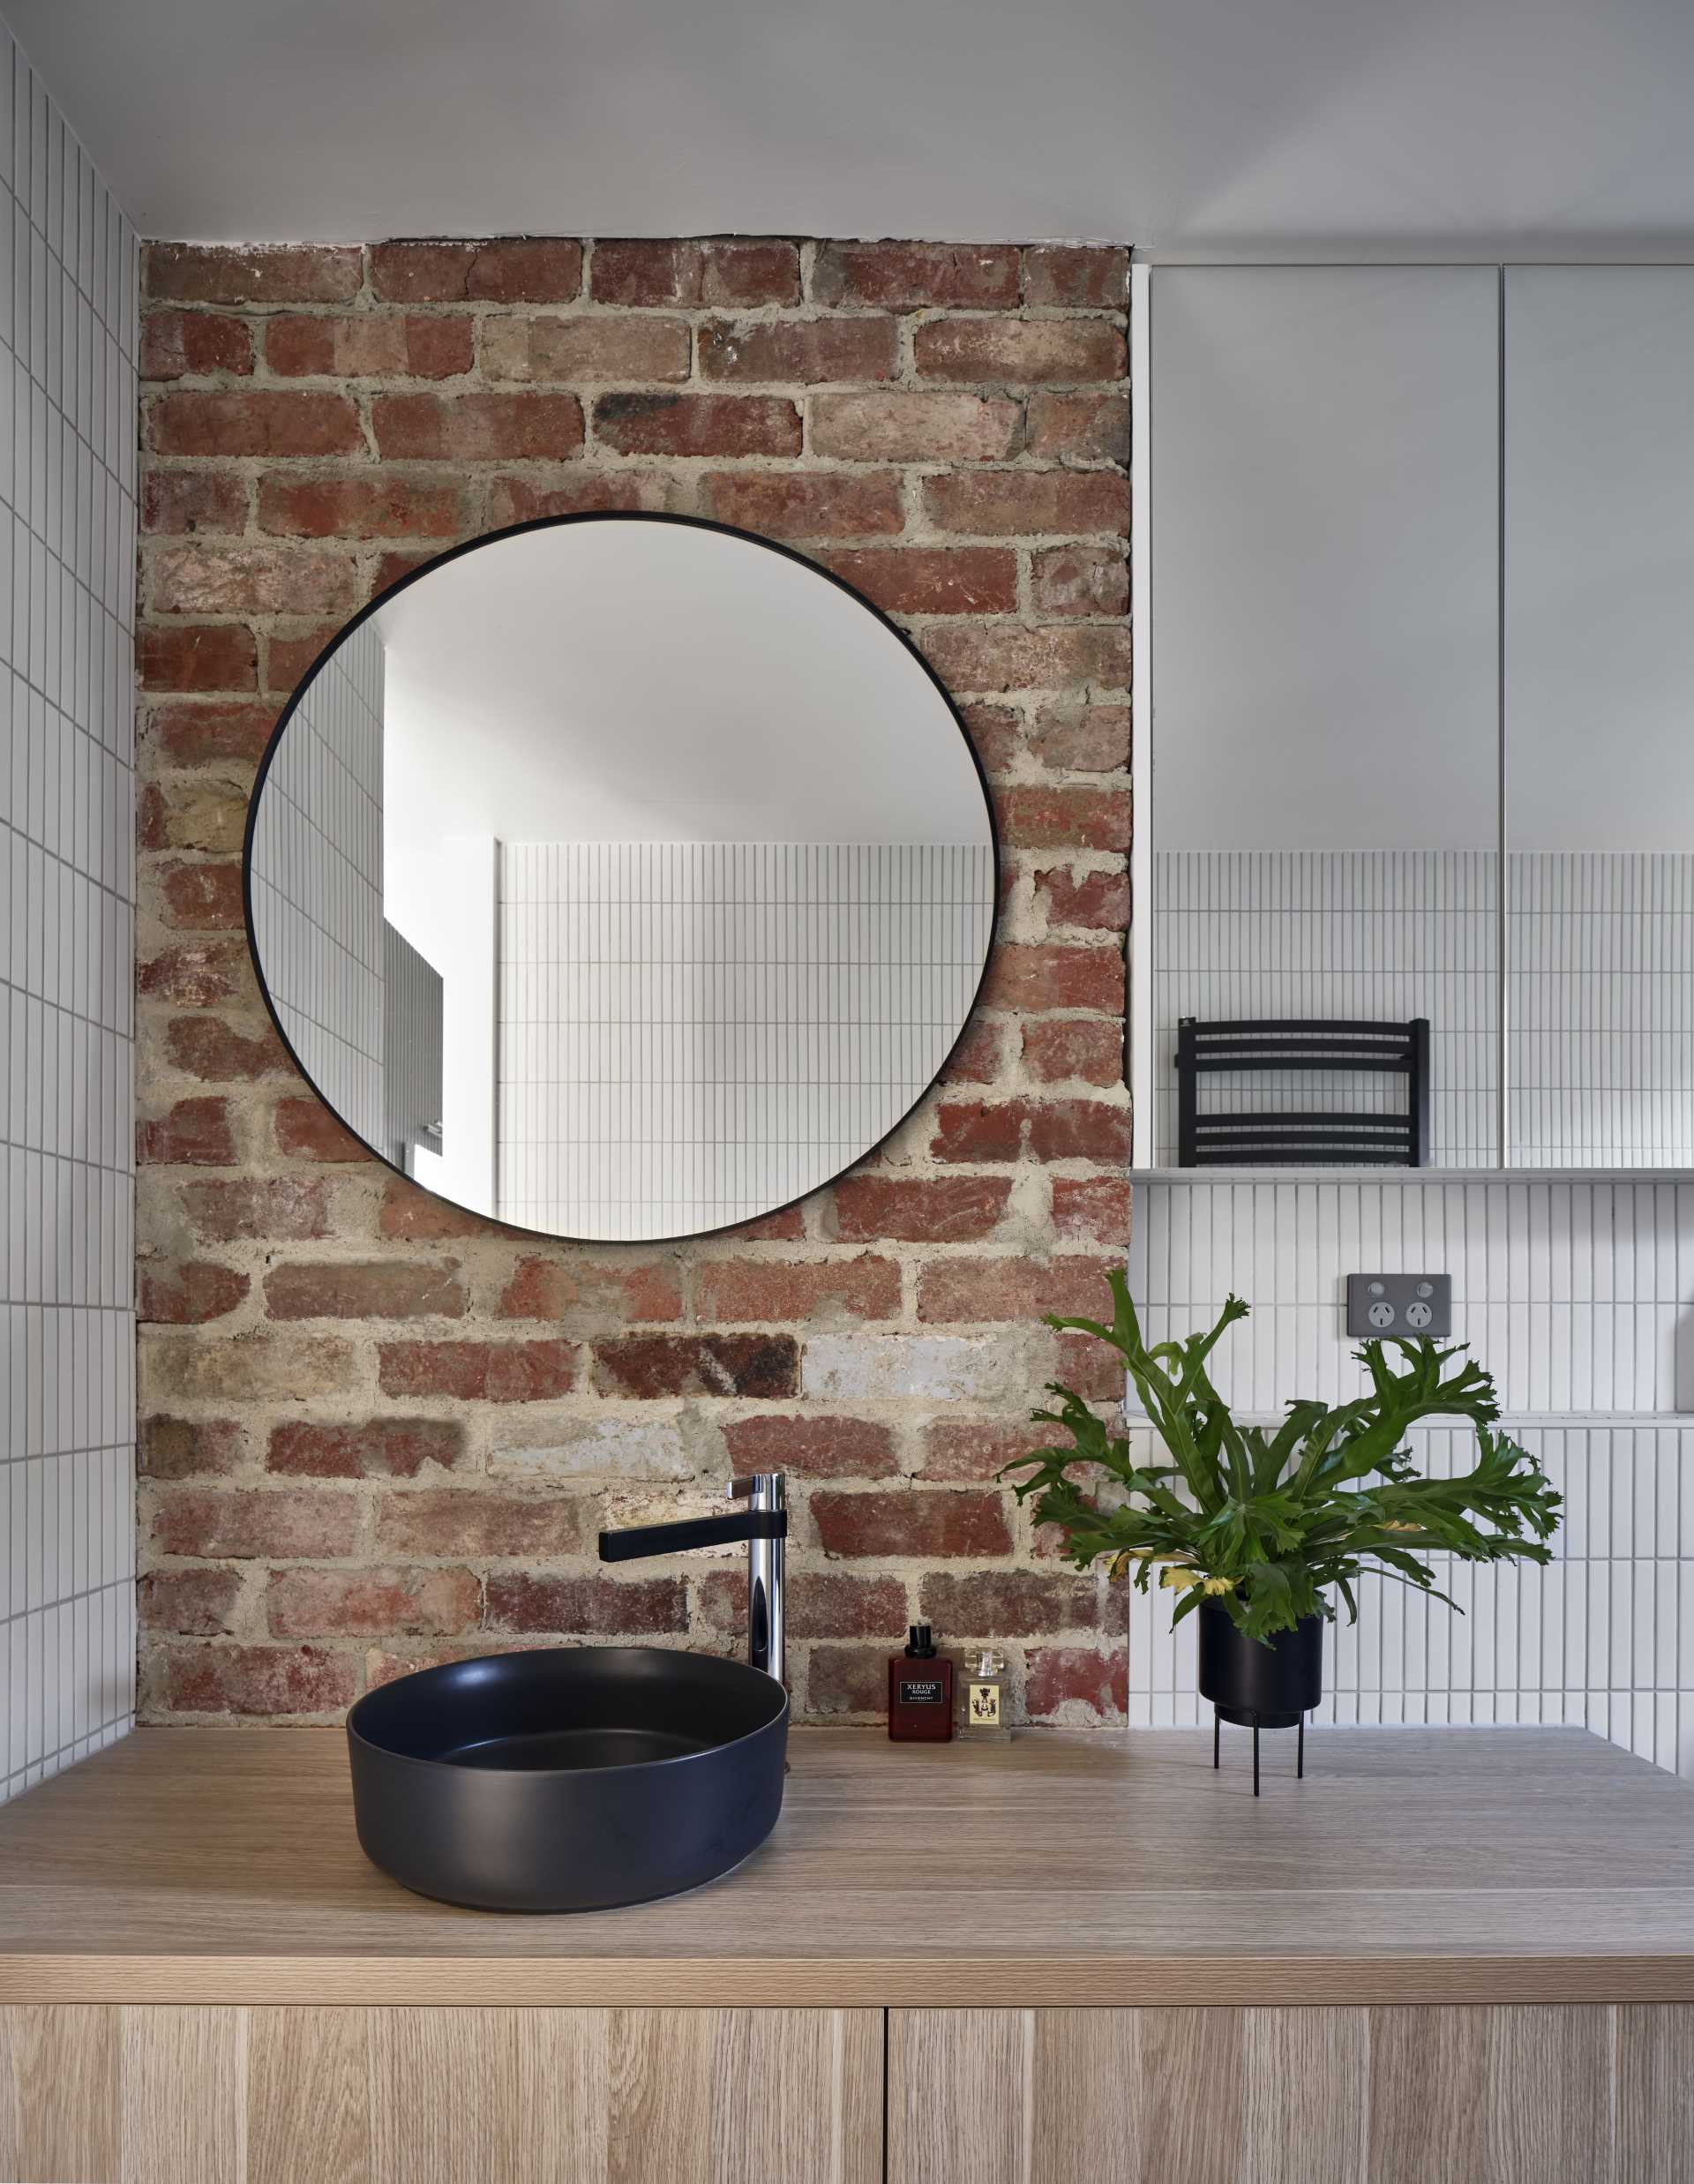 In this modern bathroom, a small brick accent wall provides a backdrop for the round mirror above the vanity, while vertical rectangular tiles cover the other walls.